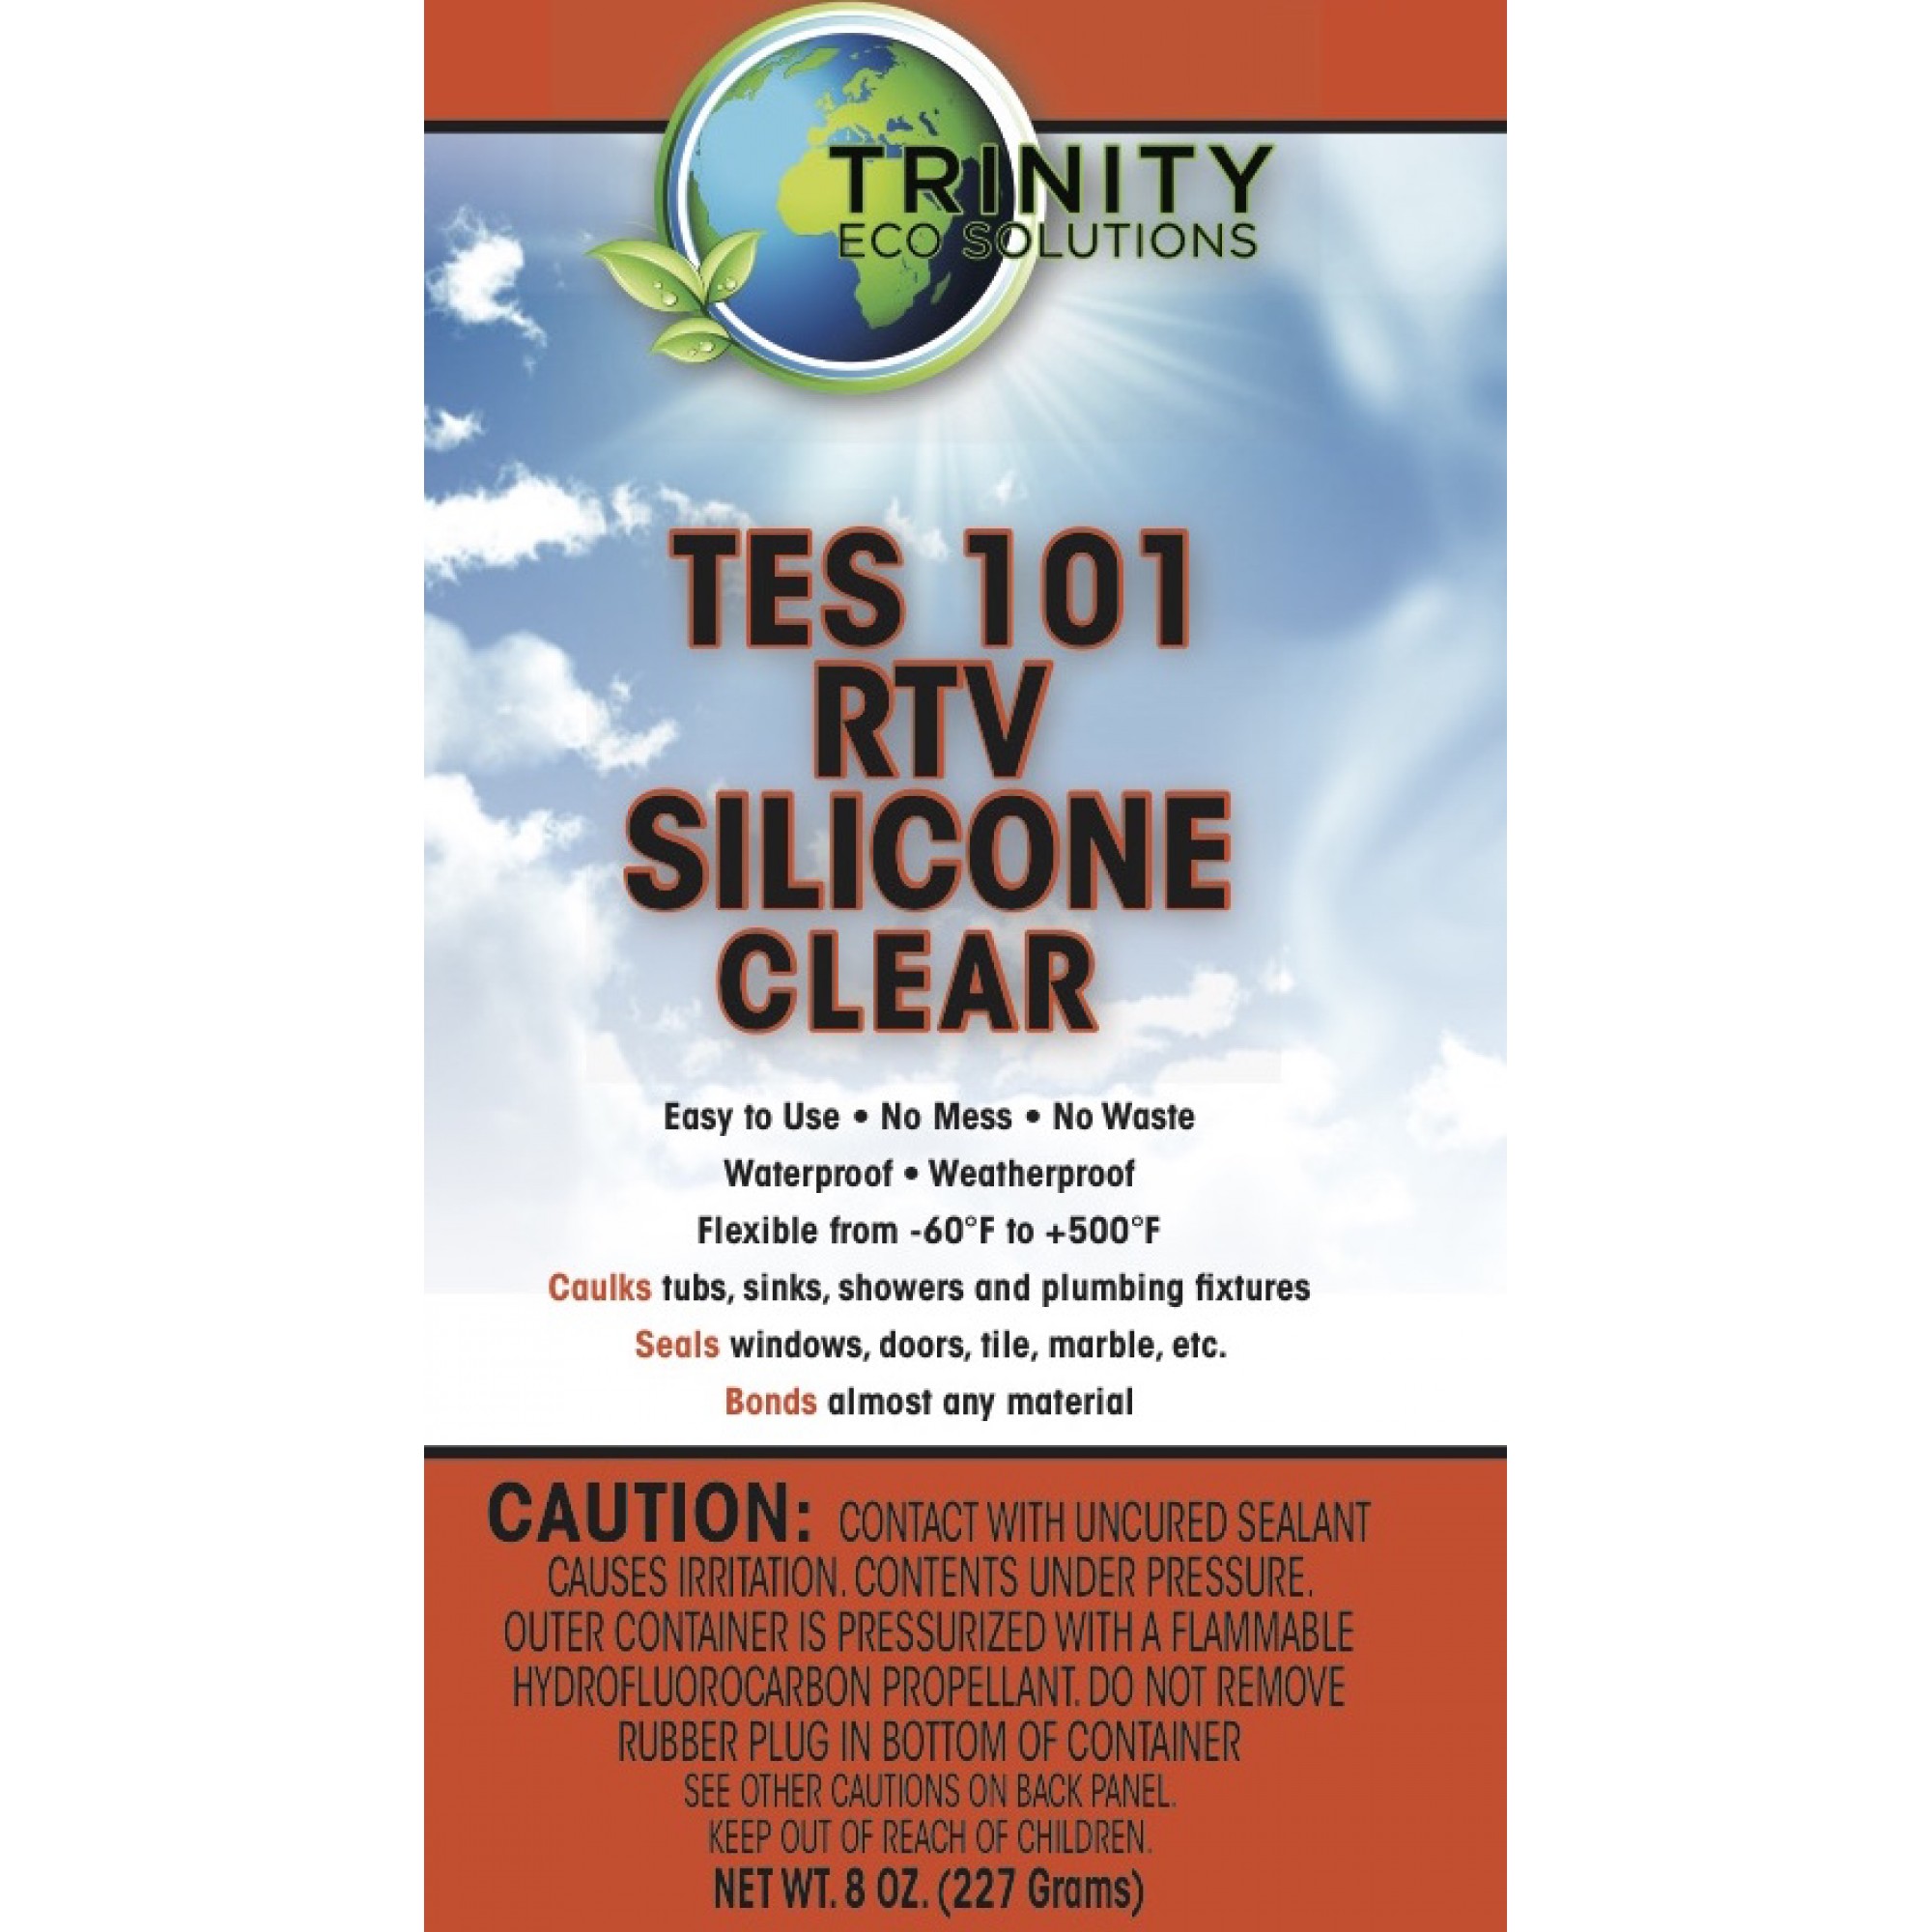 TES 101 RTV Silicone Clear